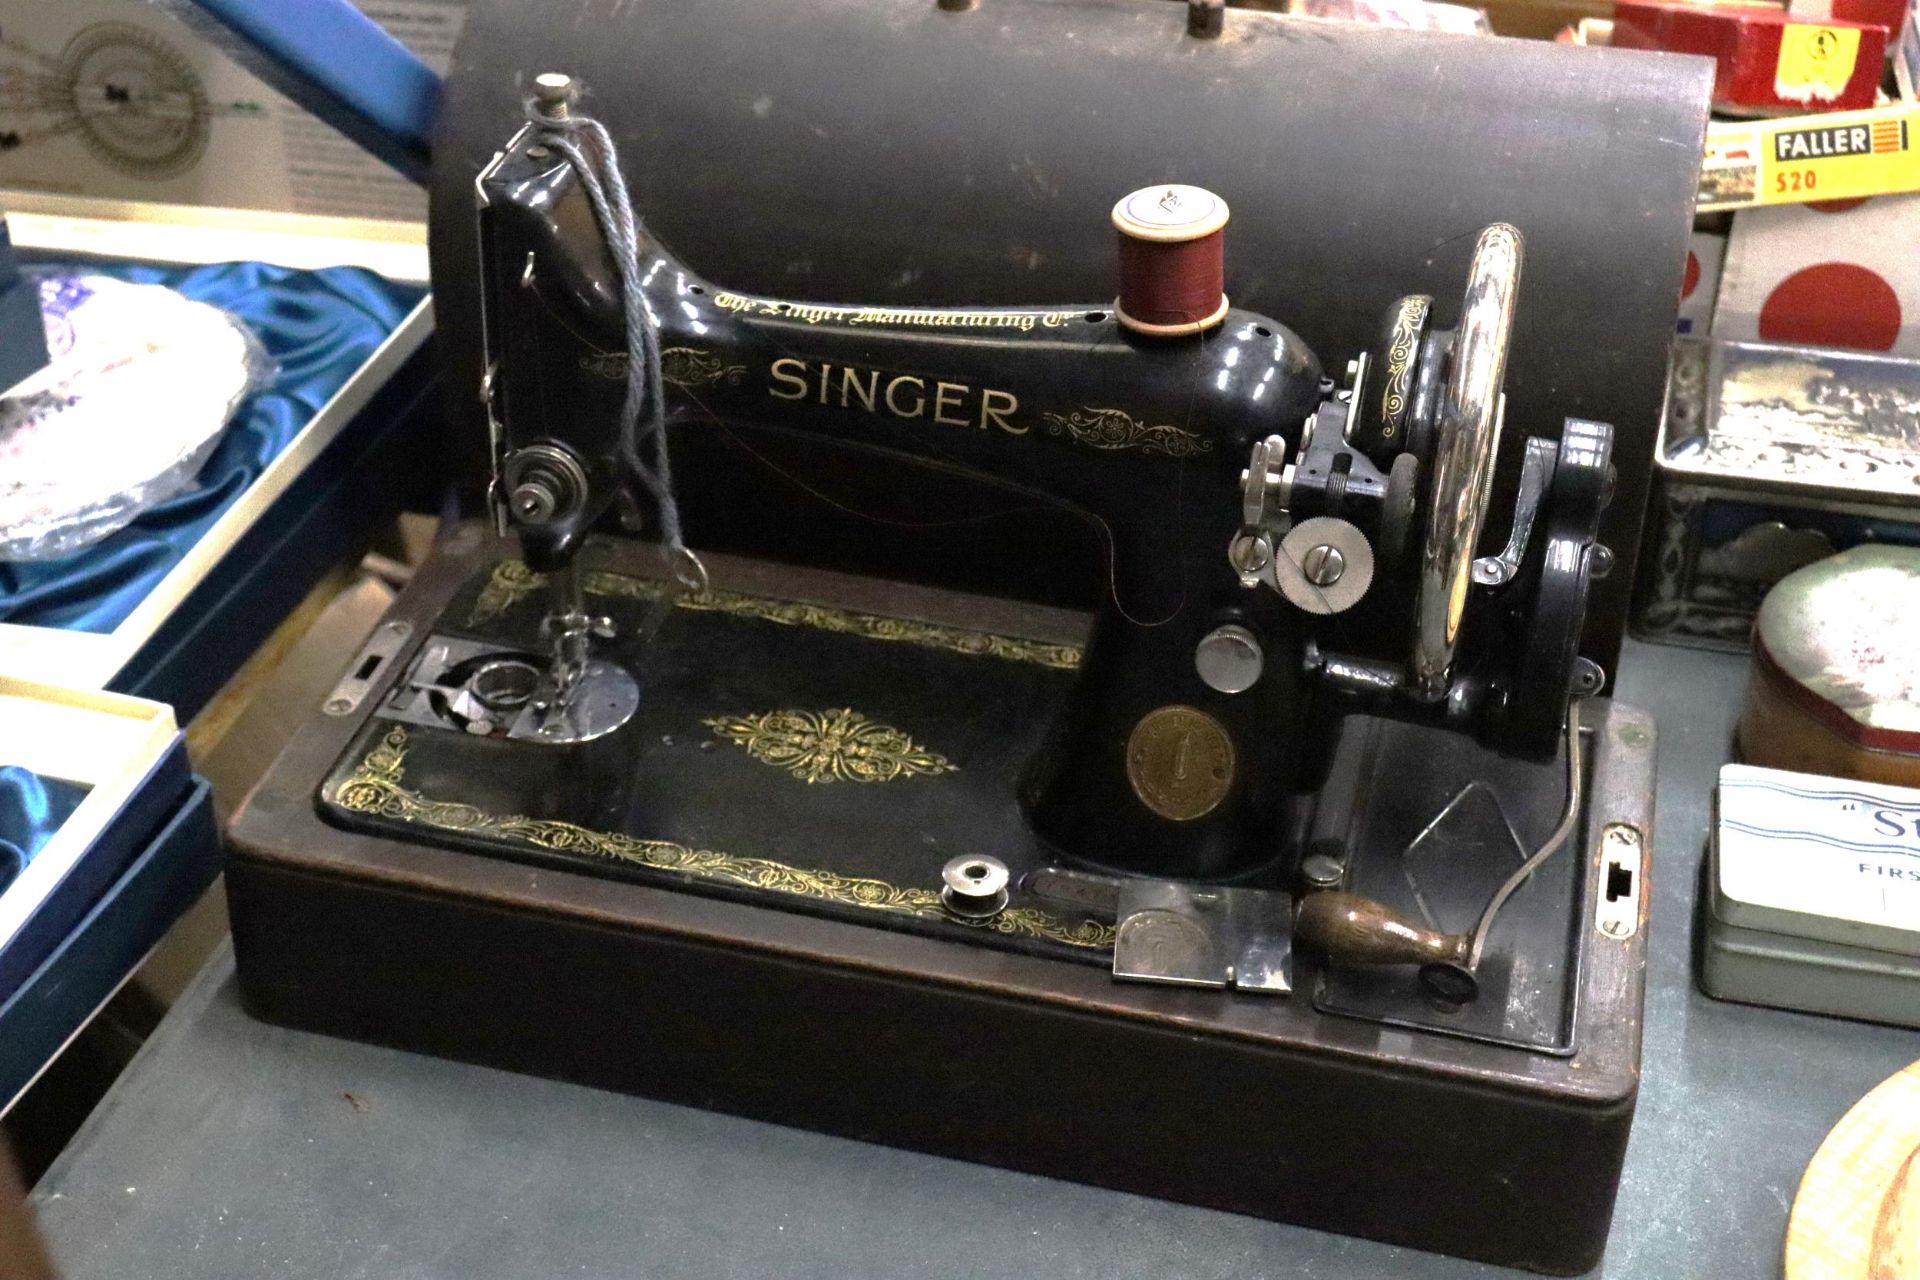 A VINTAGE SINGER SEWING MACHINE WITH ORIGINAL CASE AND KEY